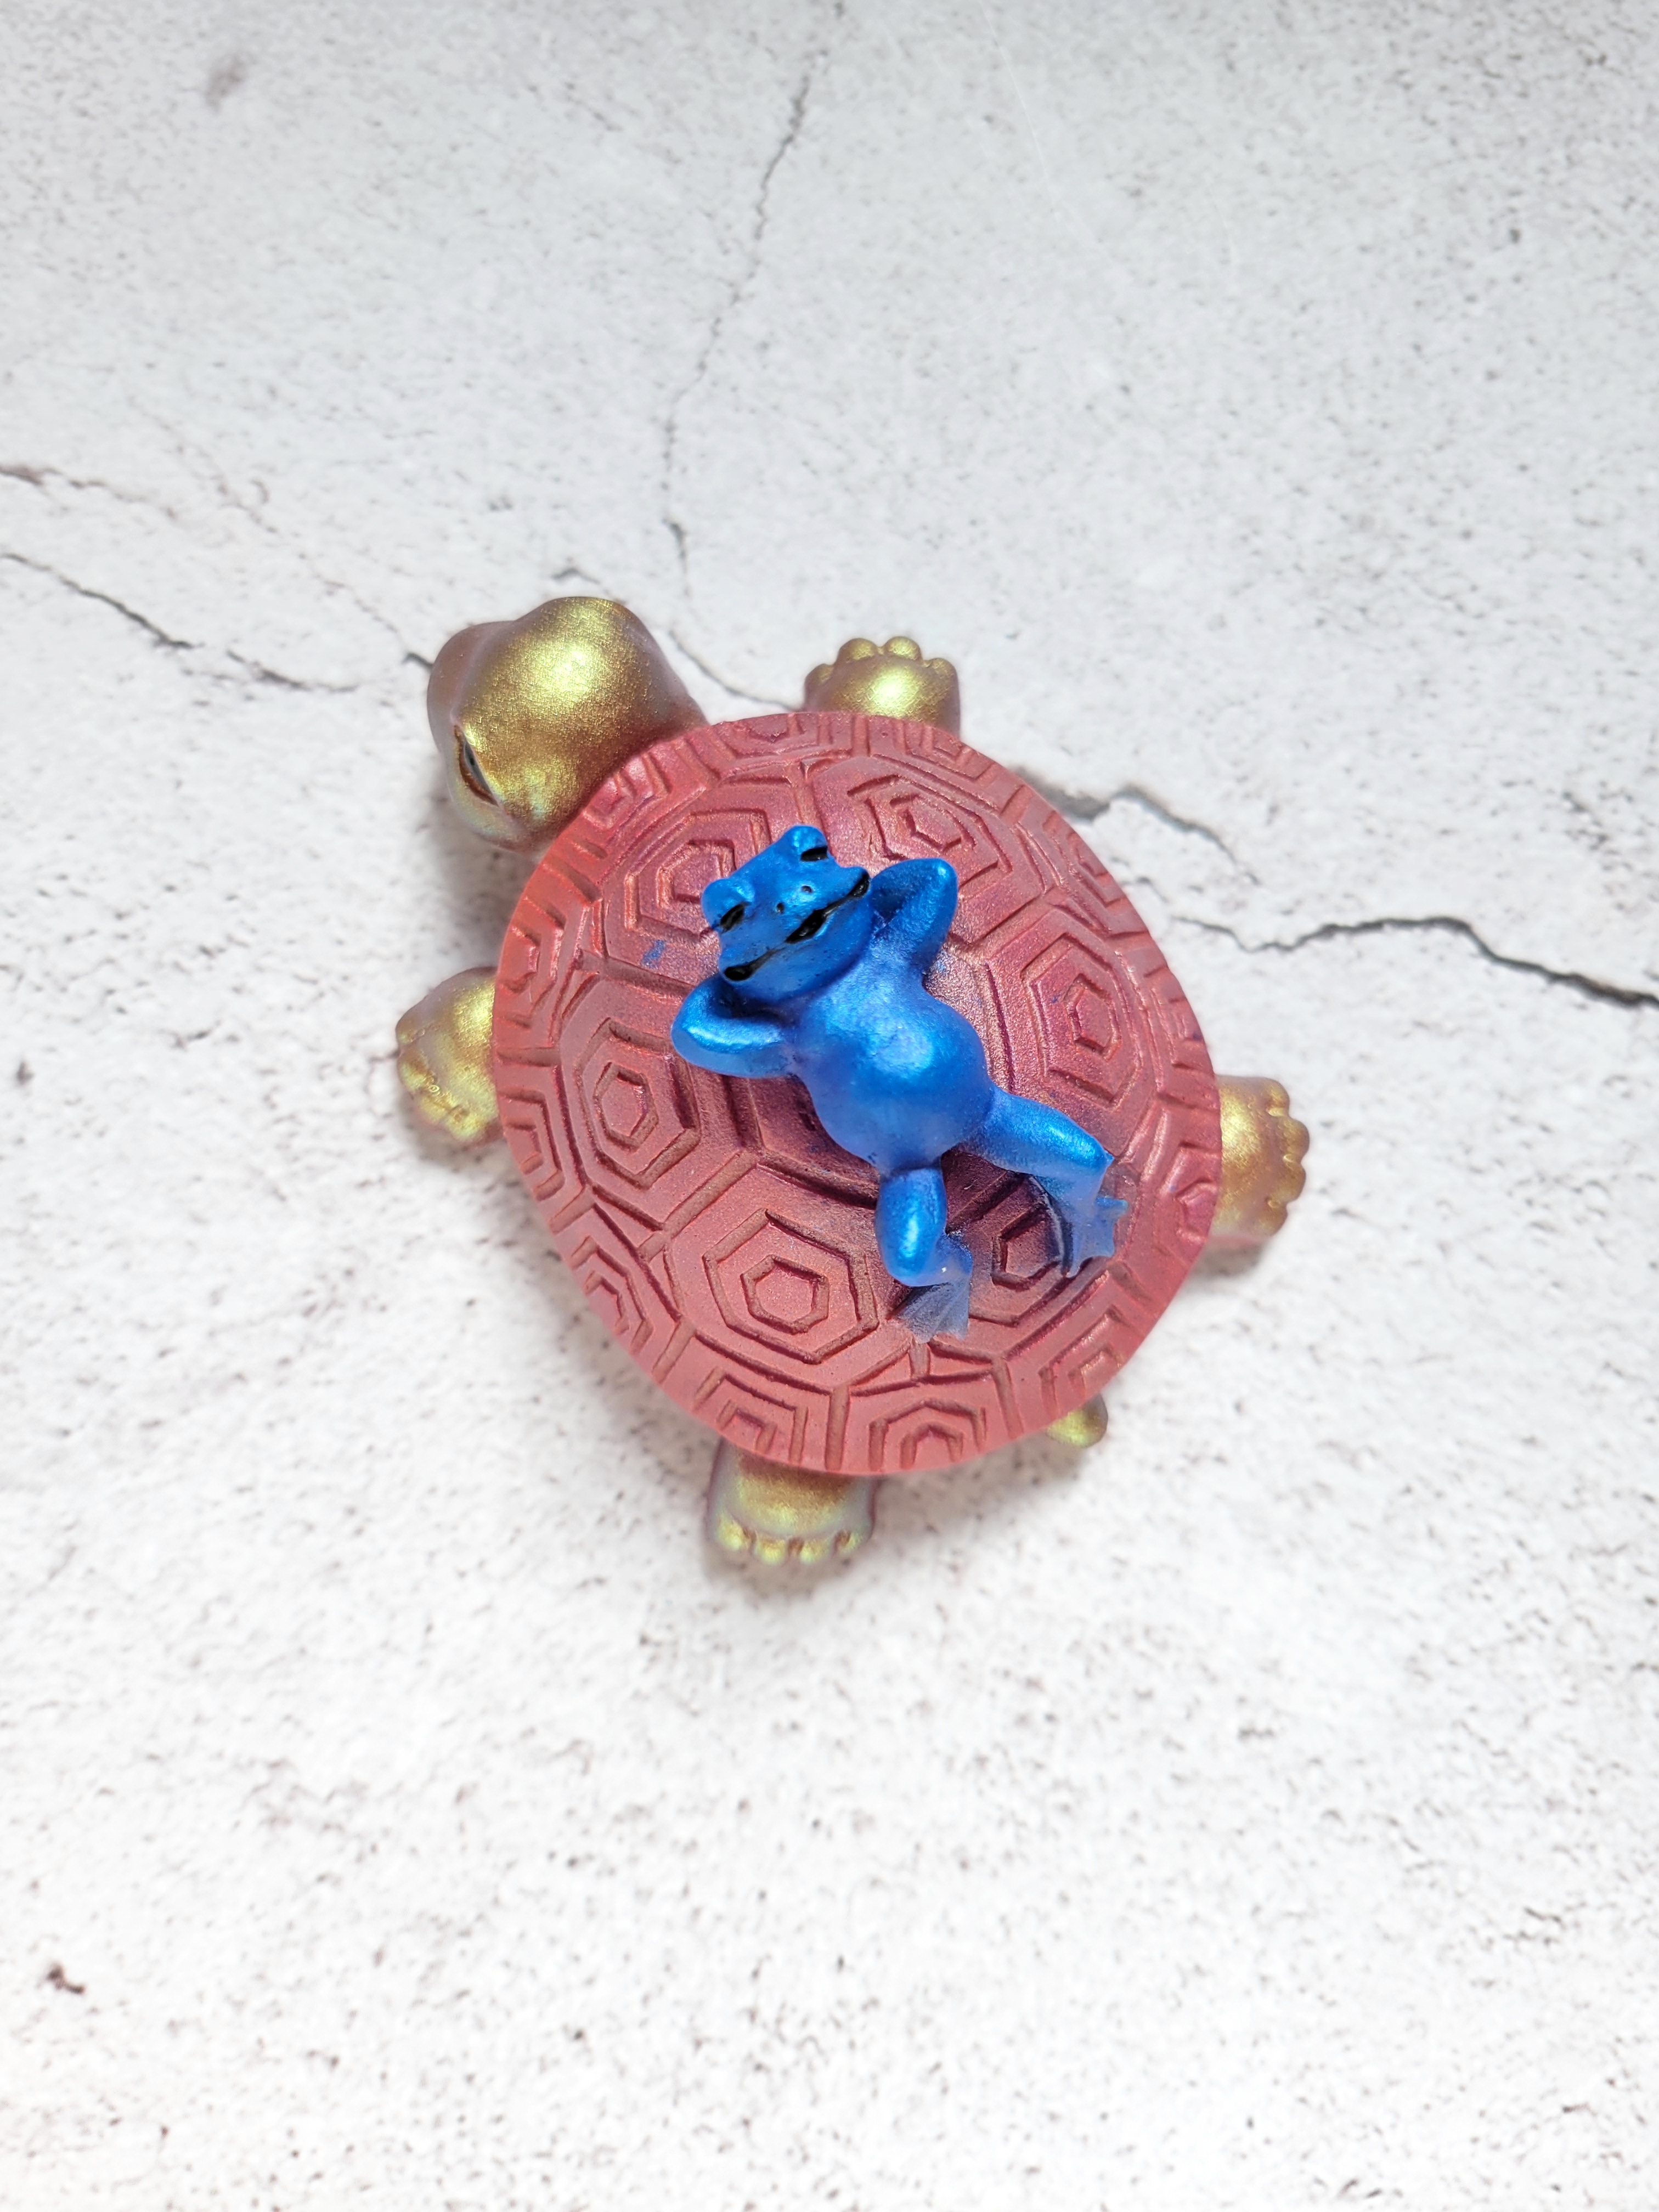 A top view of a turtle figure with a blue frog lounging on top of its shell. The turtle is gold with a reddish shell, with black eyes and nostrils.